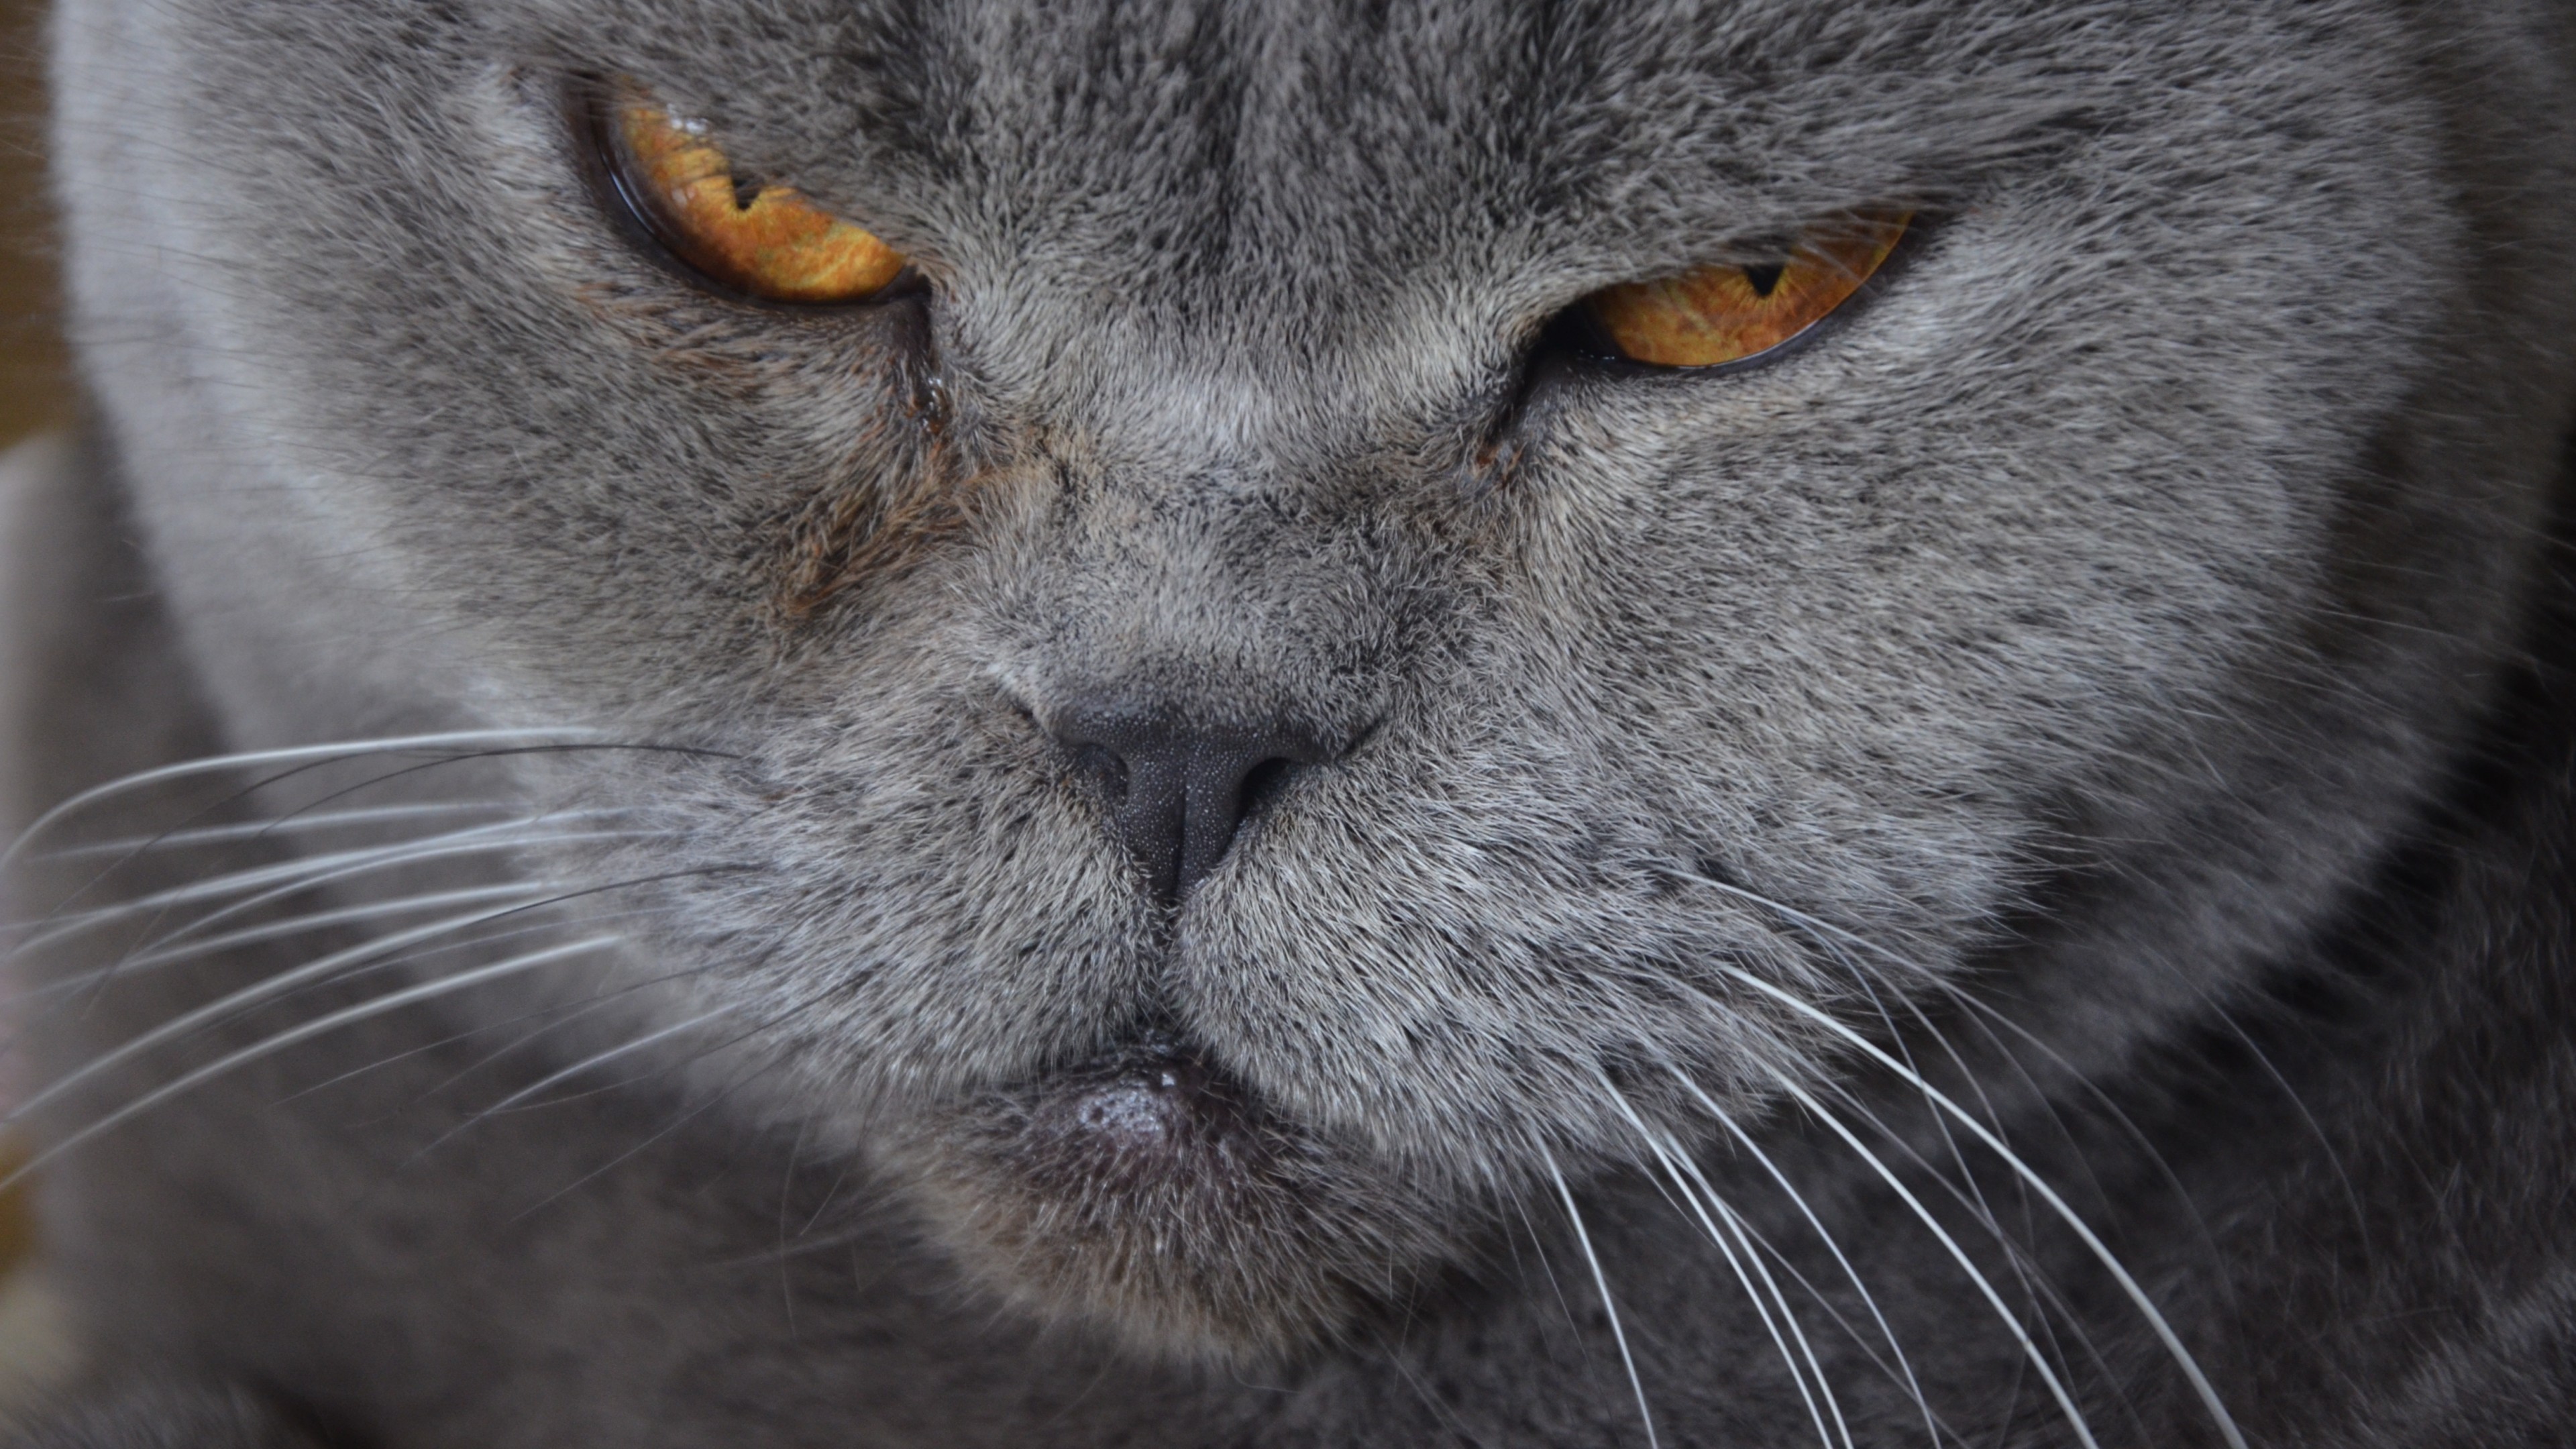 Download 3840x2160 Angry Cat, Close Up, British Shorthair